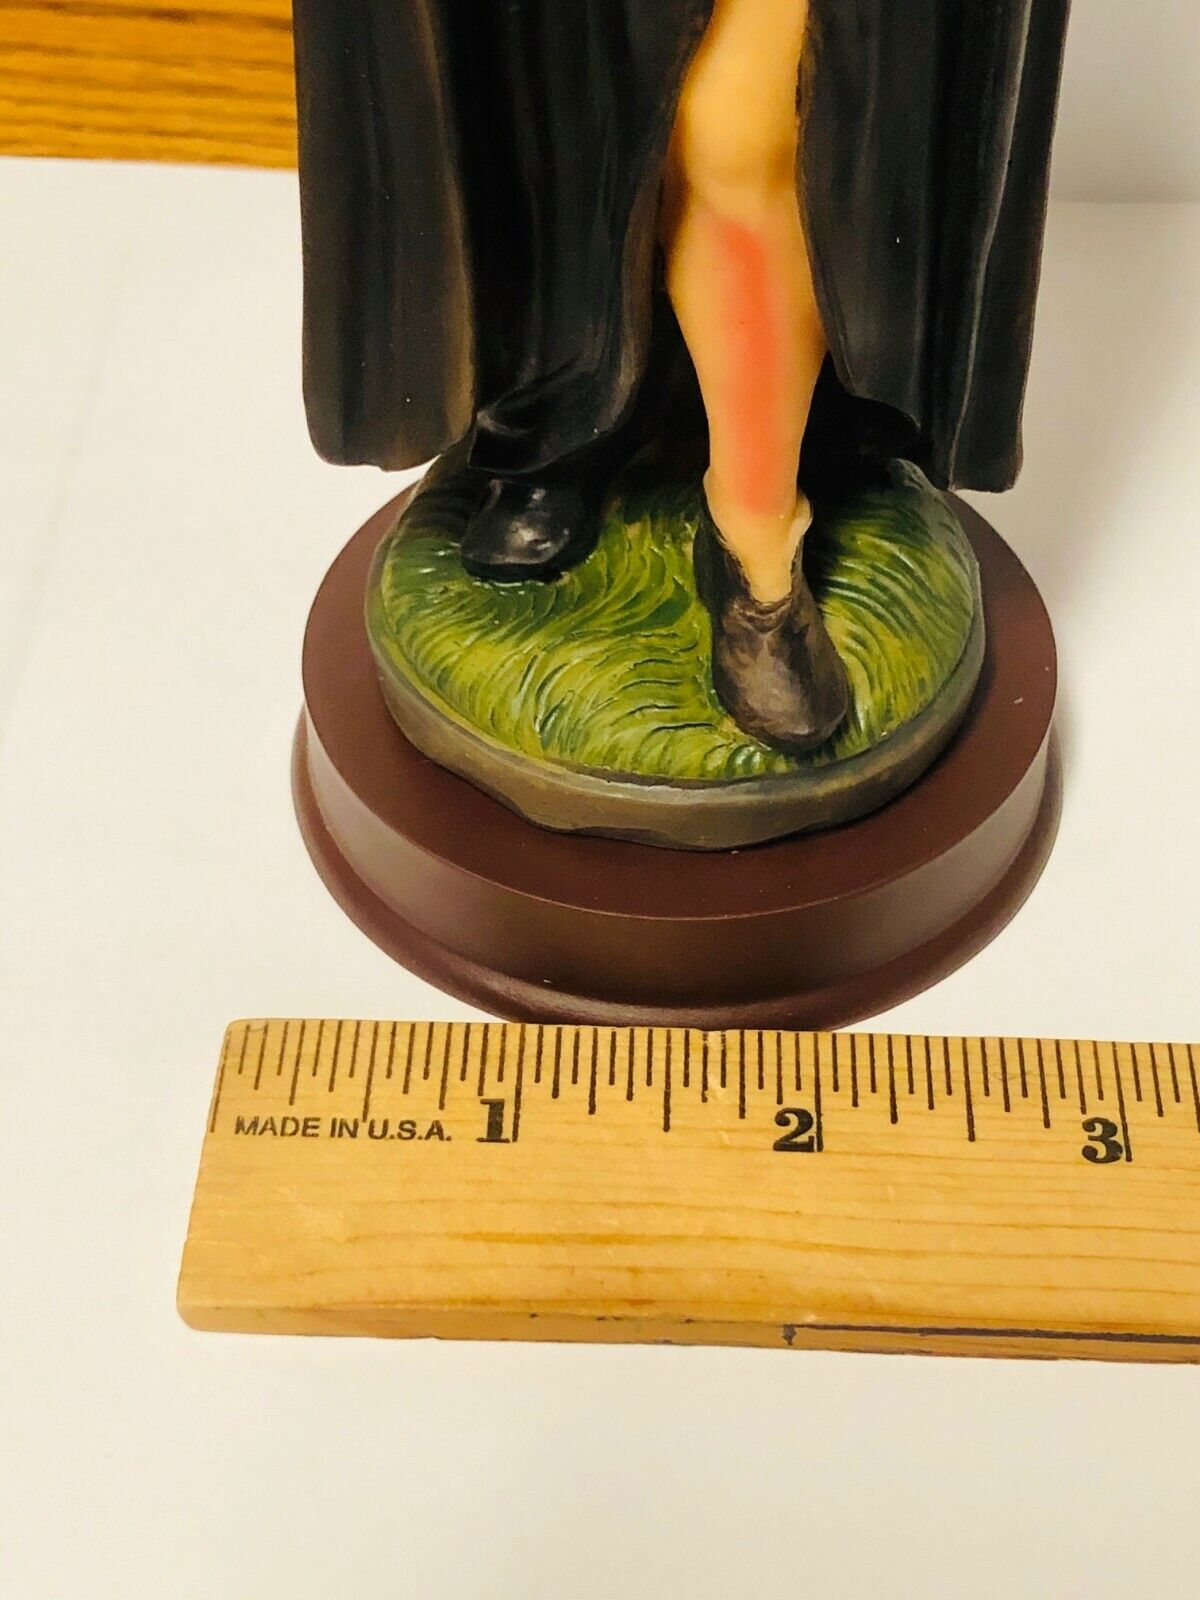 Saint Peregrine (The Cancer Saint)  8 1/2" Statue, New - Bob and Penny Lord